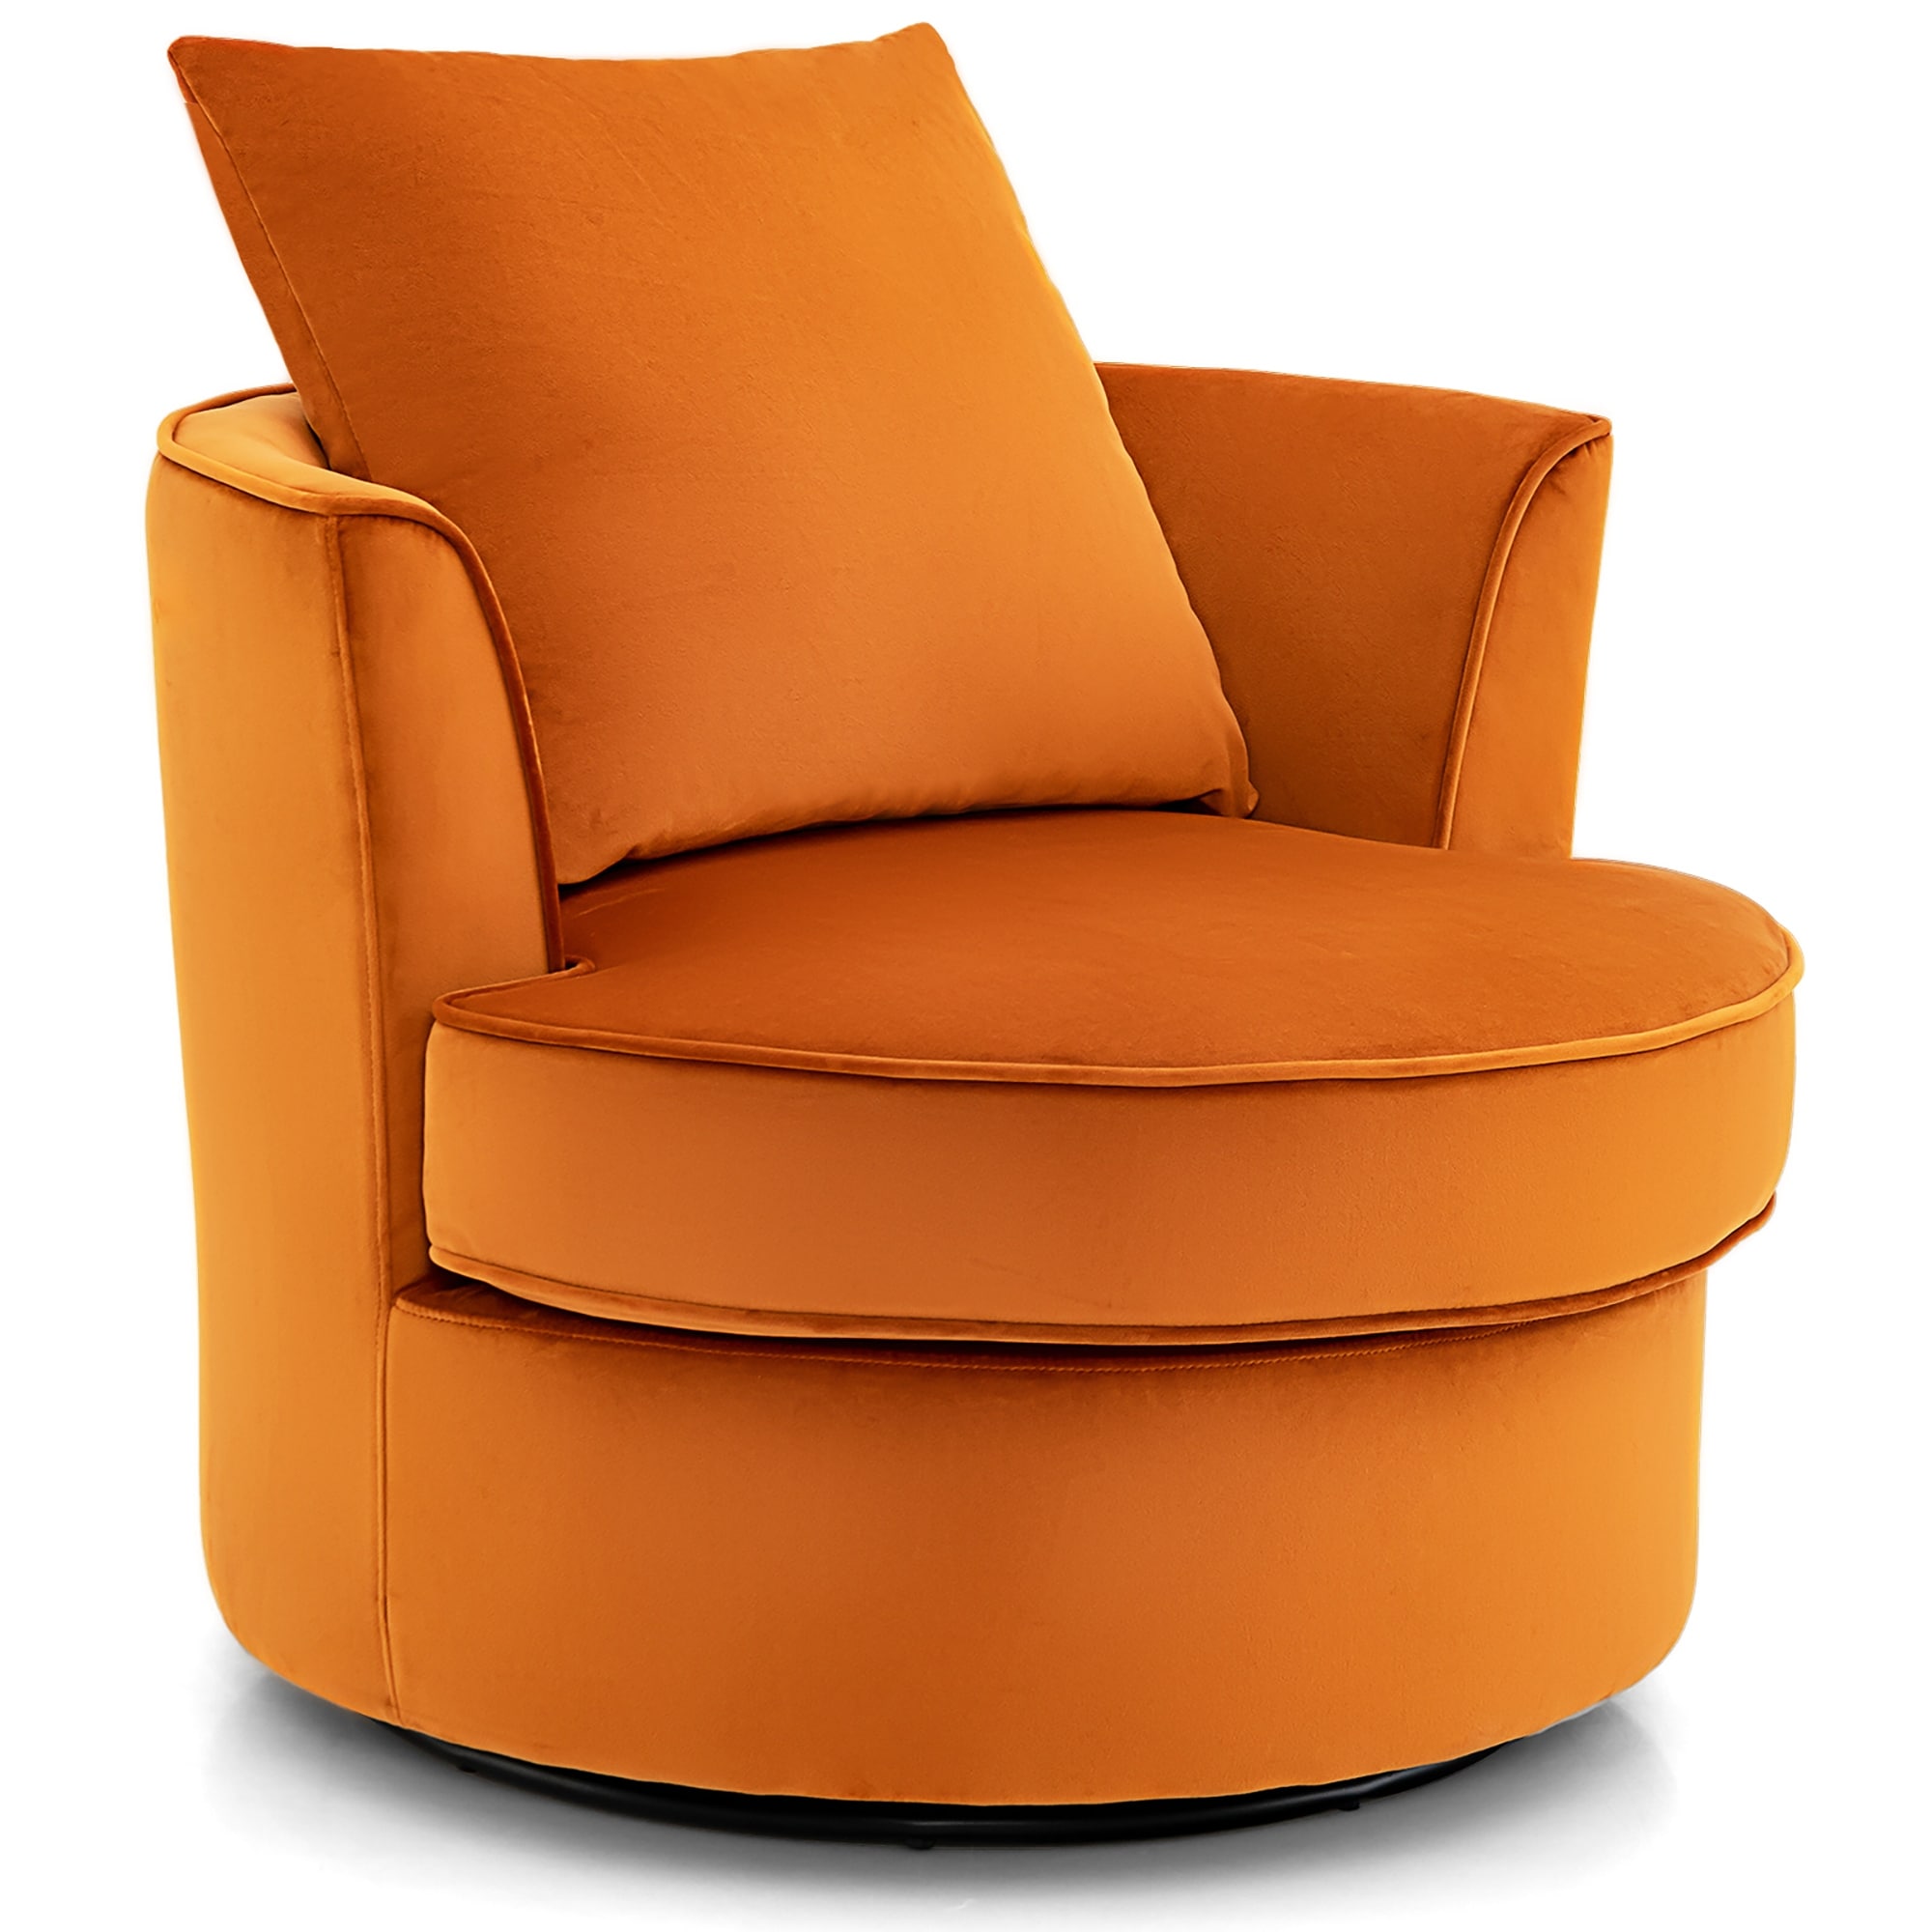 Costway Modern Swivel Barrel Chair Accent Round Club Chair No Assembly - 32'' x 31.5'' x 33.5''